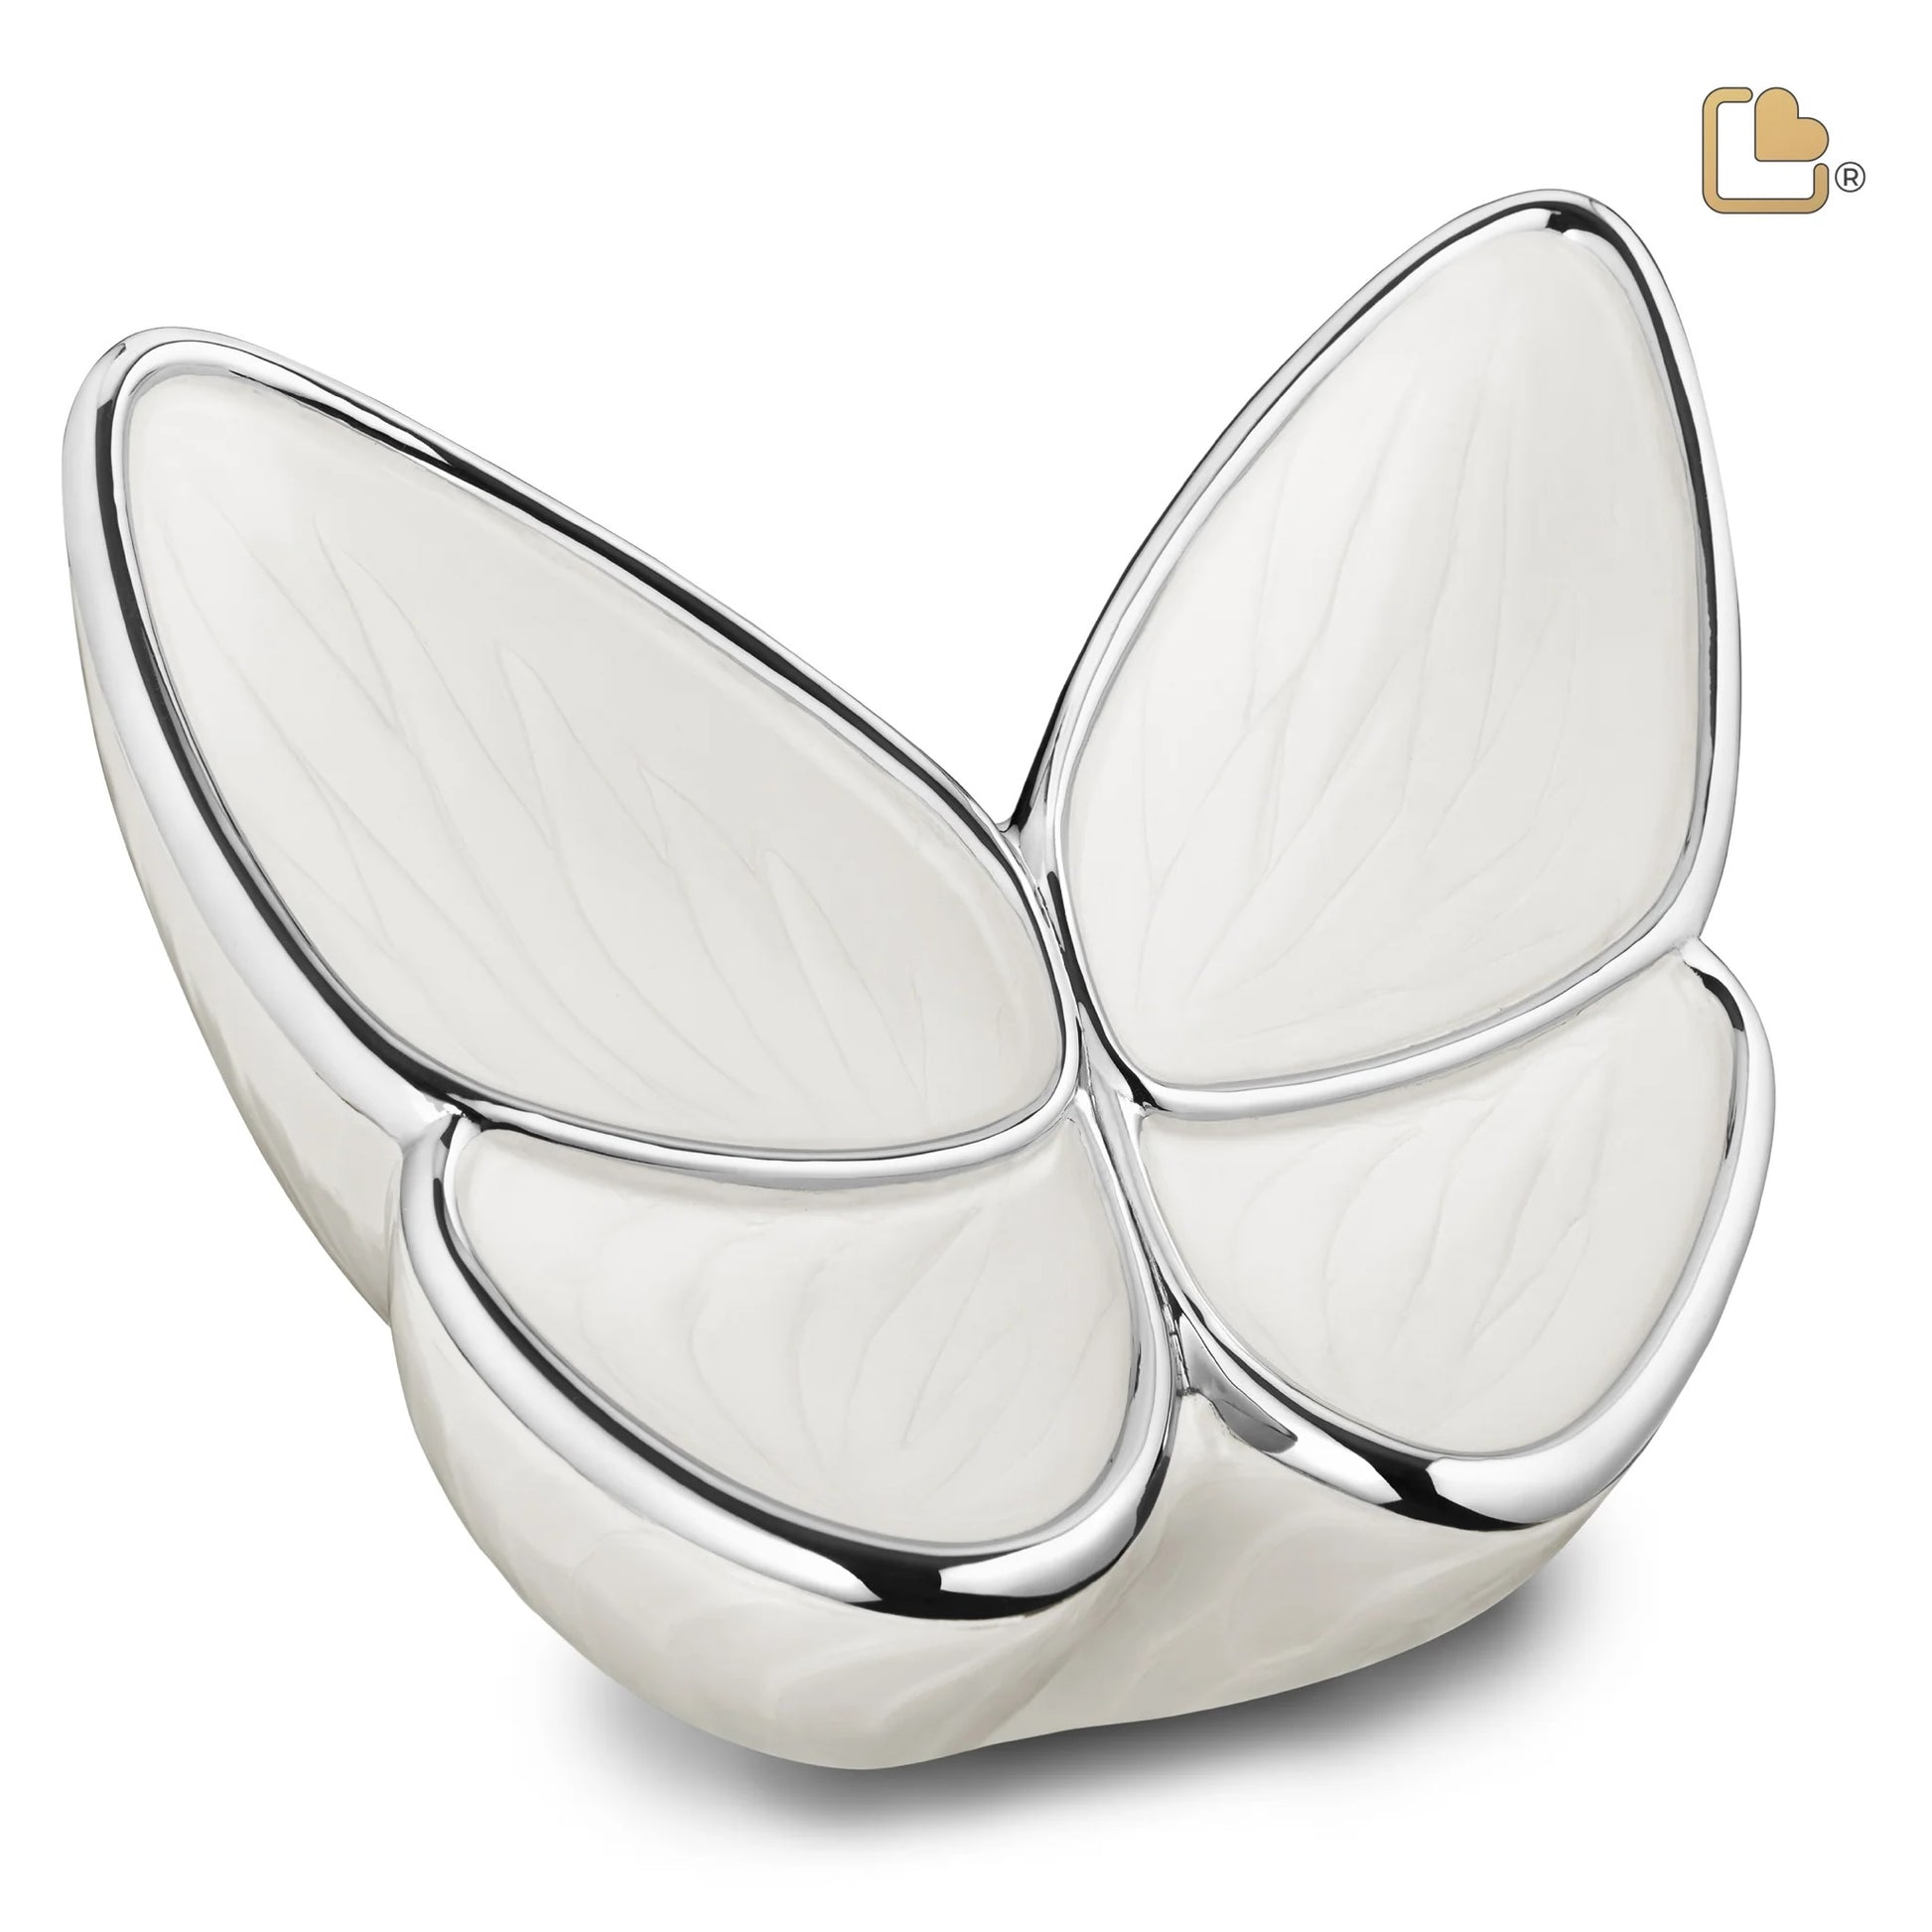 Brass Butterfly Shaped Urn with White Enamel Paint.